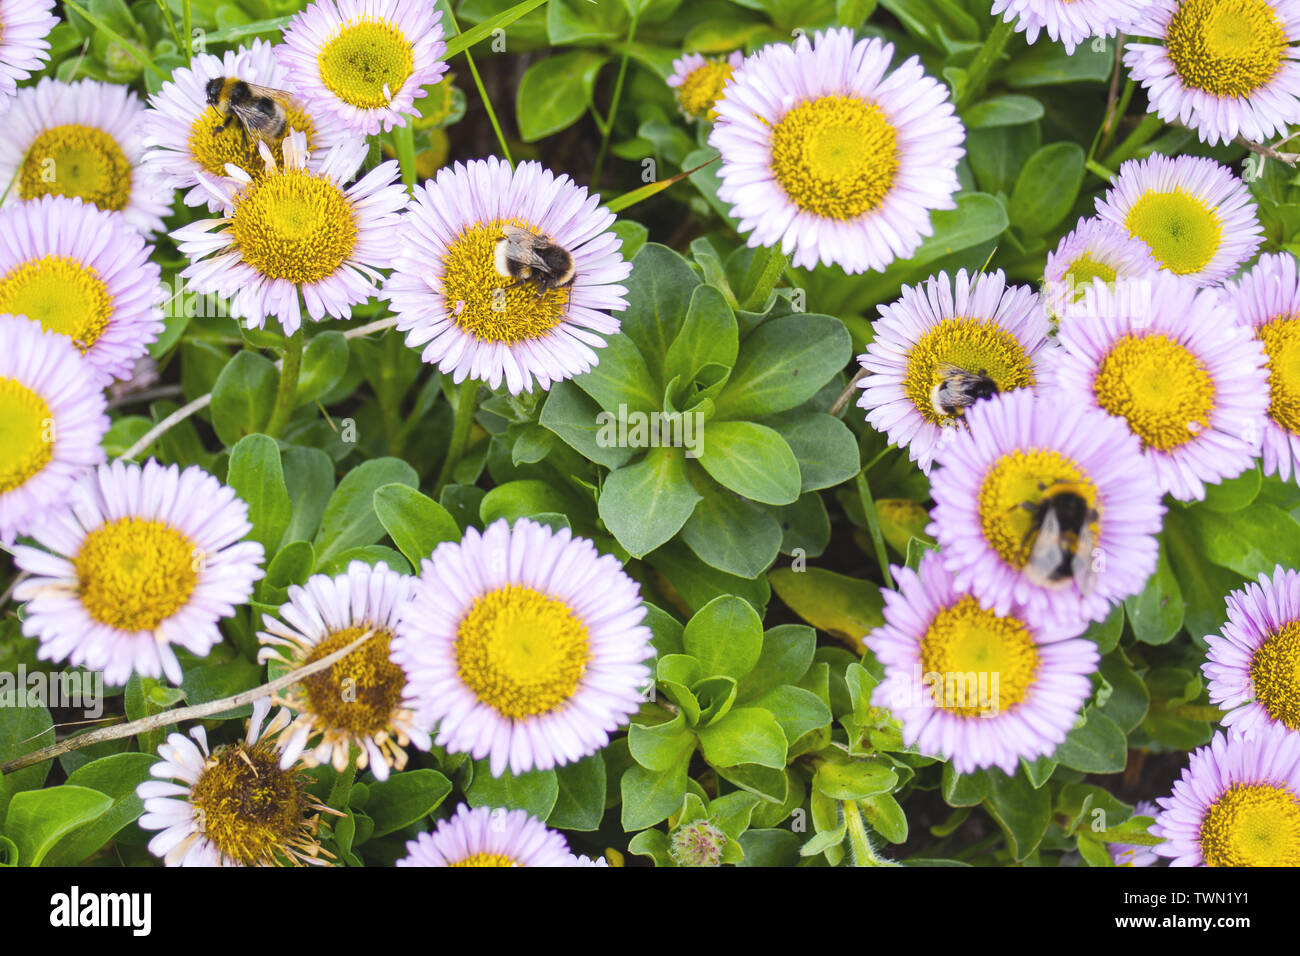 A patterned flower scene in summer with honey bees Stock Photo